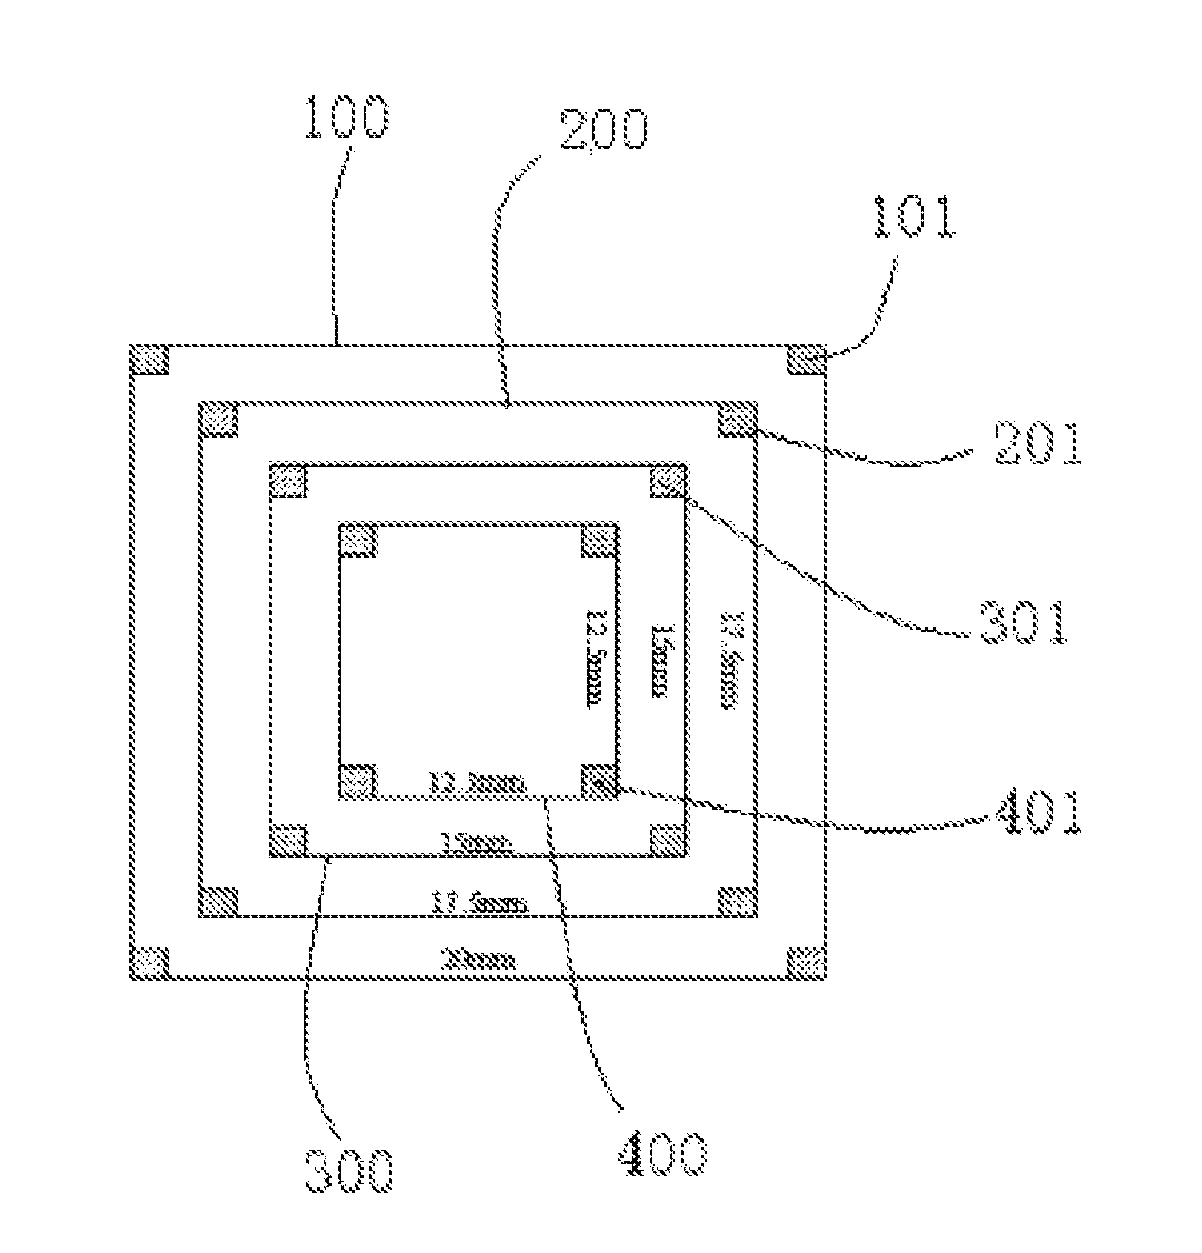 Lithography stepper alignment and control method